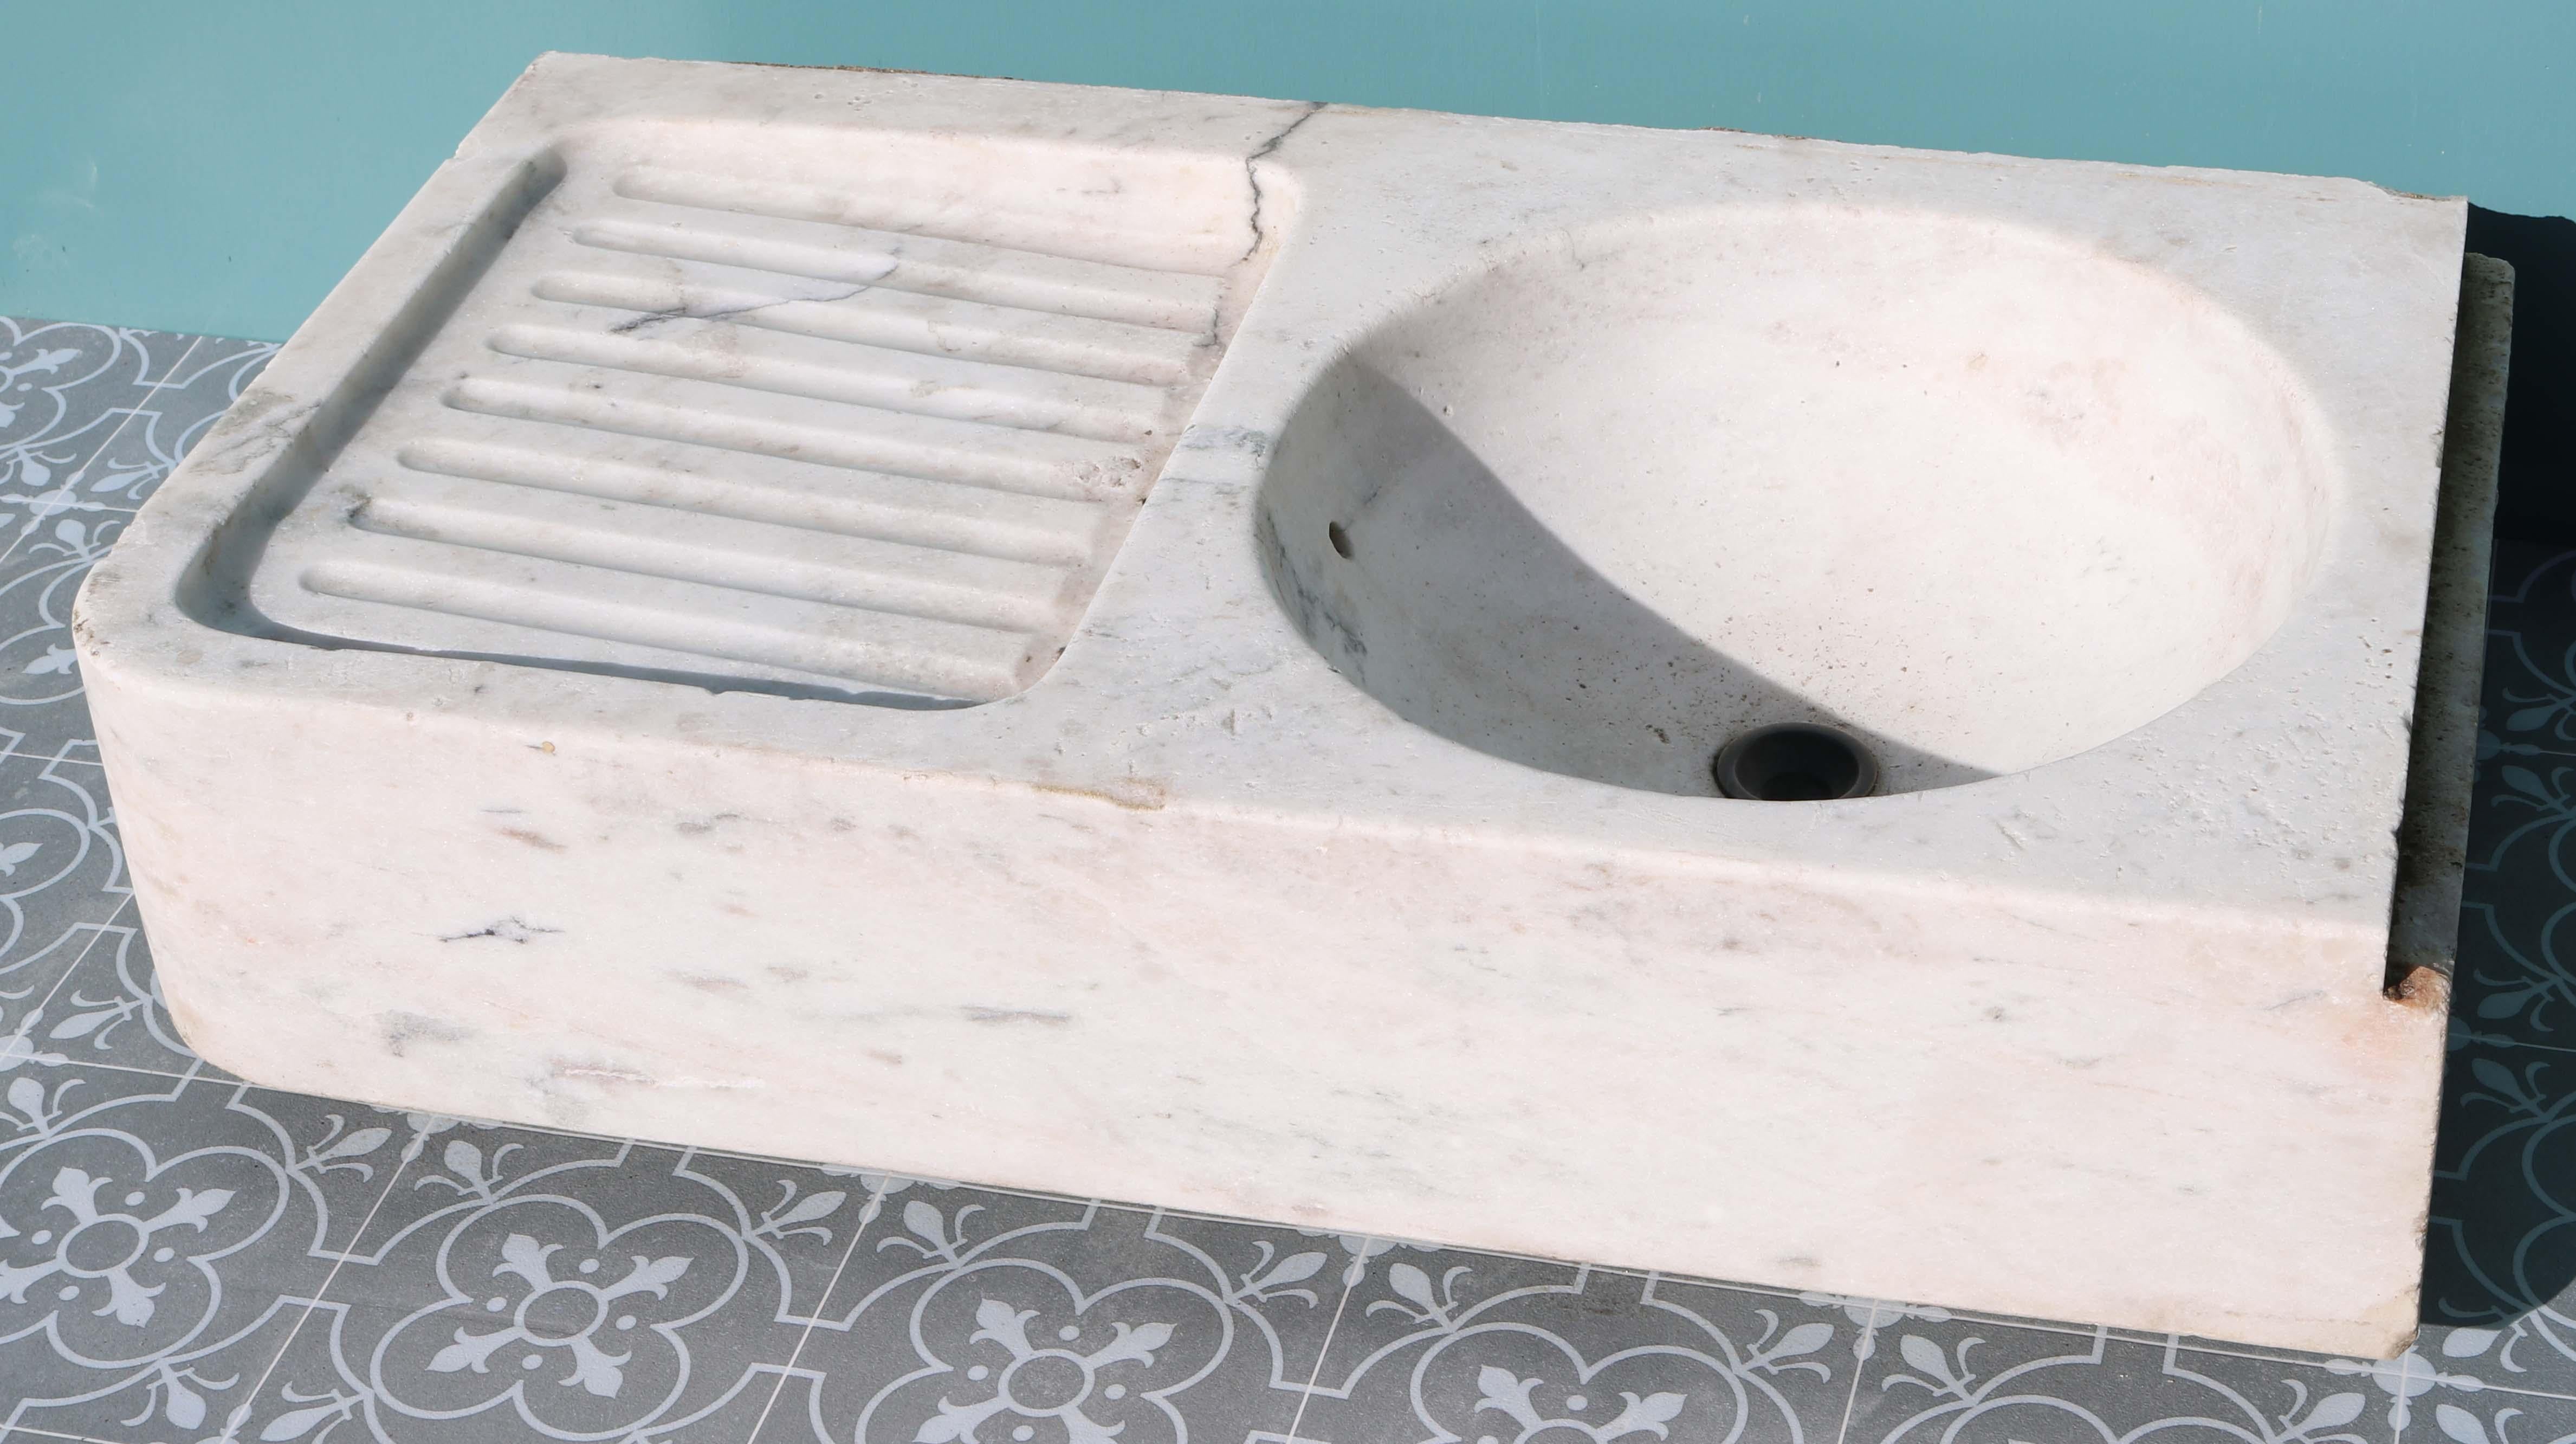 A reclaimed white and grey veined Carrara marble kitchen sink with drainer.

Condition report

Good structural condition. Lightly weathered finish. No cracks or breaks.

Style

Country, Georgian, Italianate, Louis XV, Victorian

Date of